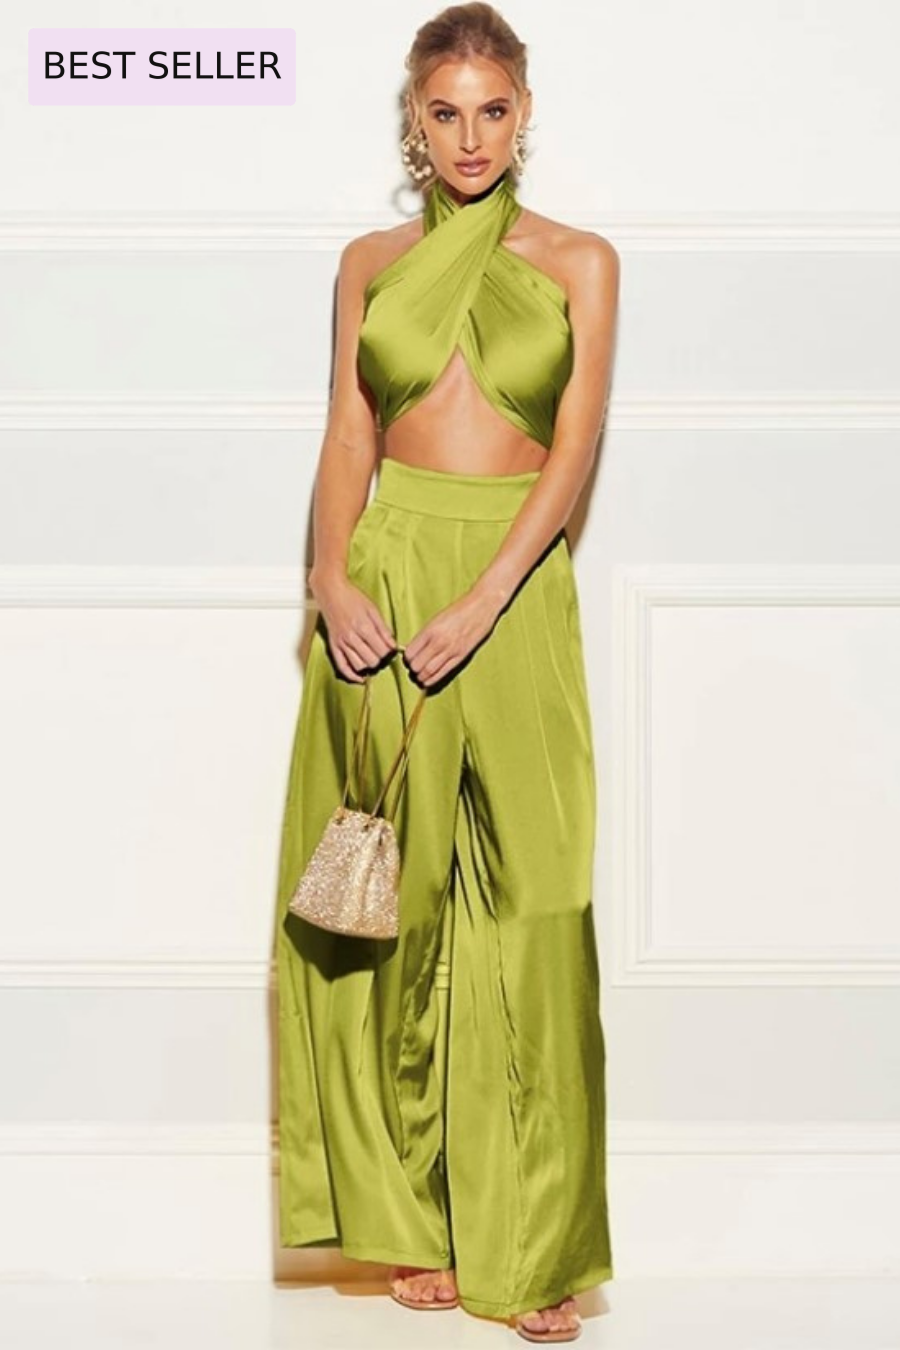 two piece set wrap crop top scarf wide leg trousers brilliant yellow envy green royal blue silk satin shiny vacay vacation sexy day event bright bold fashionnova house of cb tiger mist boohoo missguided nastygal shop shopping women's clothing fashion trend